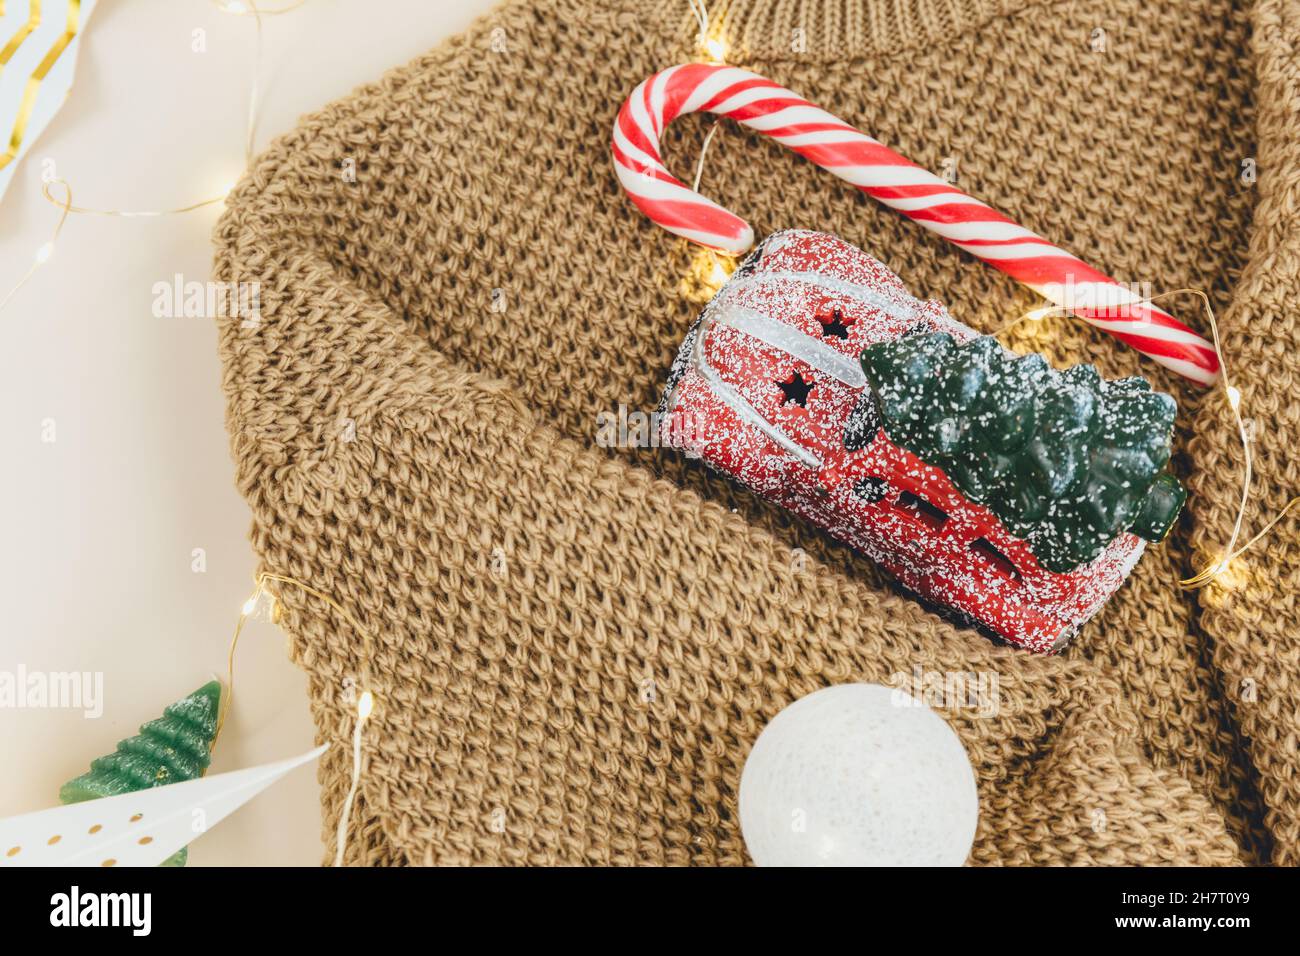 Brown knitted sweater and garlands, led lights. Women fashion winter clothes and accessories. New year and Christmas celebration mockup. Christmas bac Stock Photo